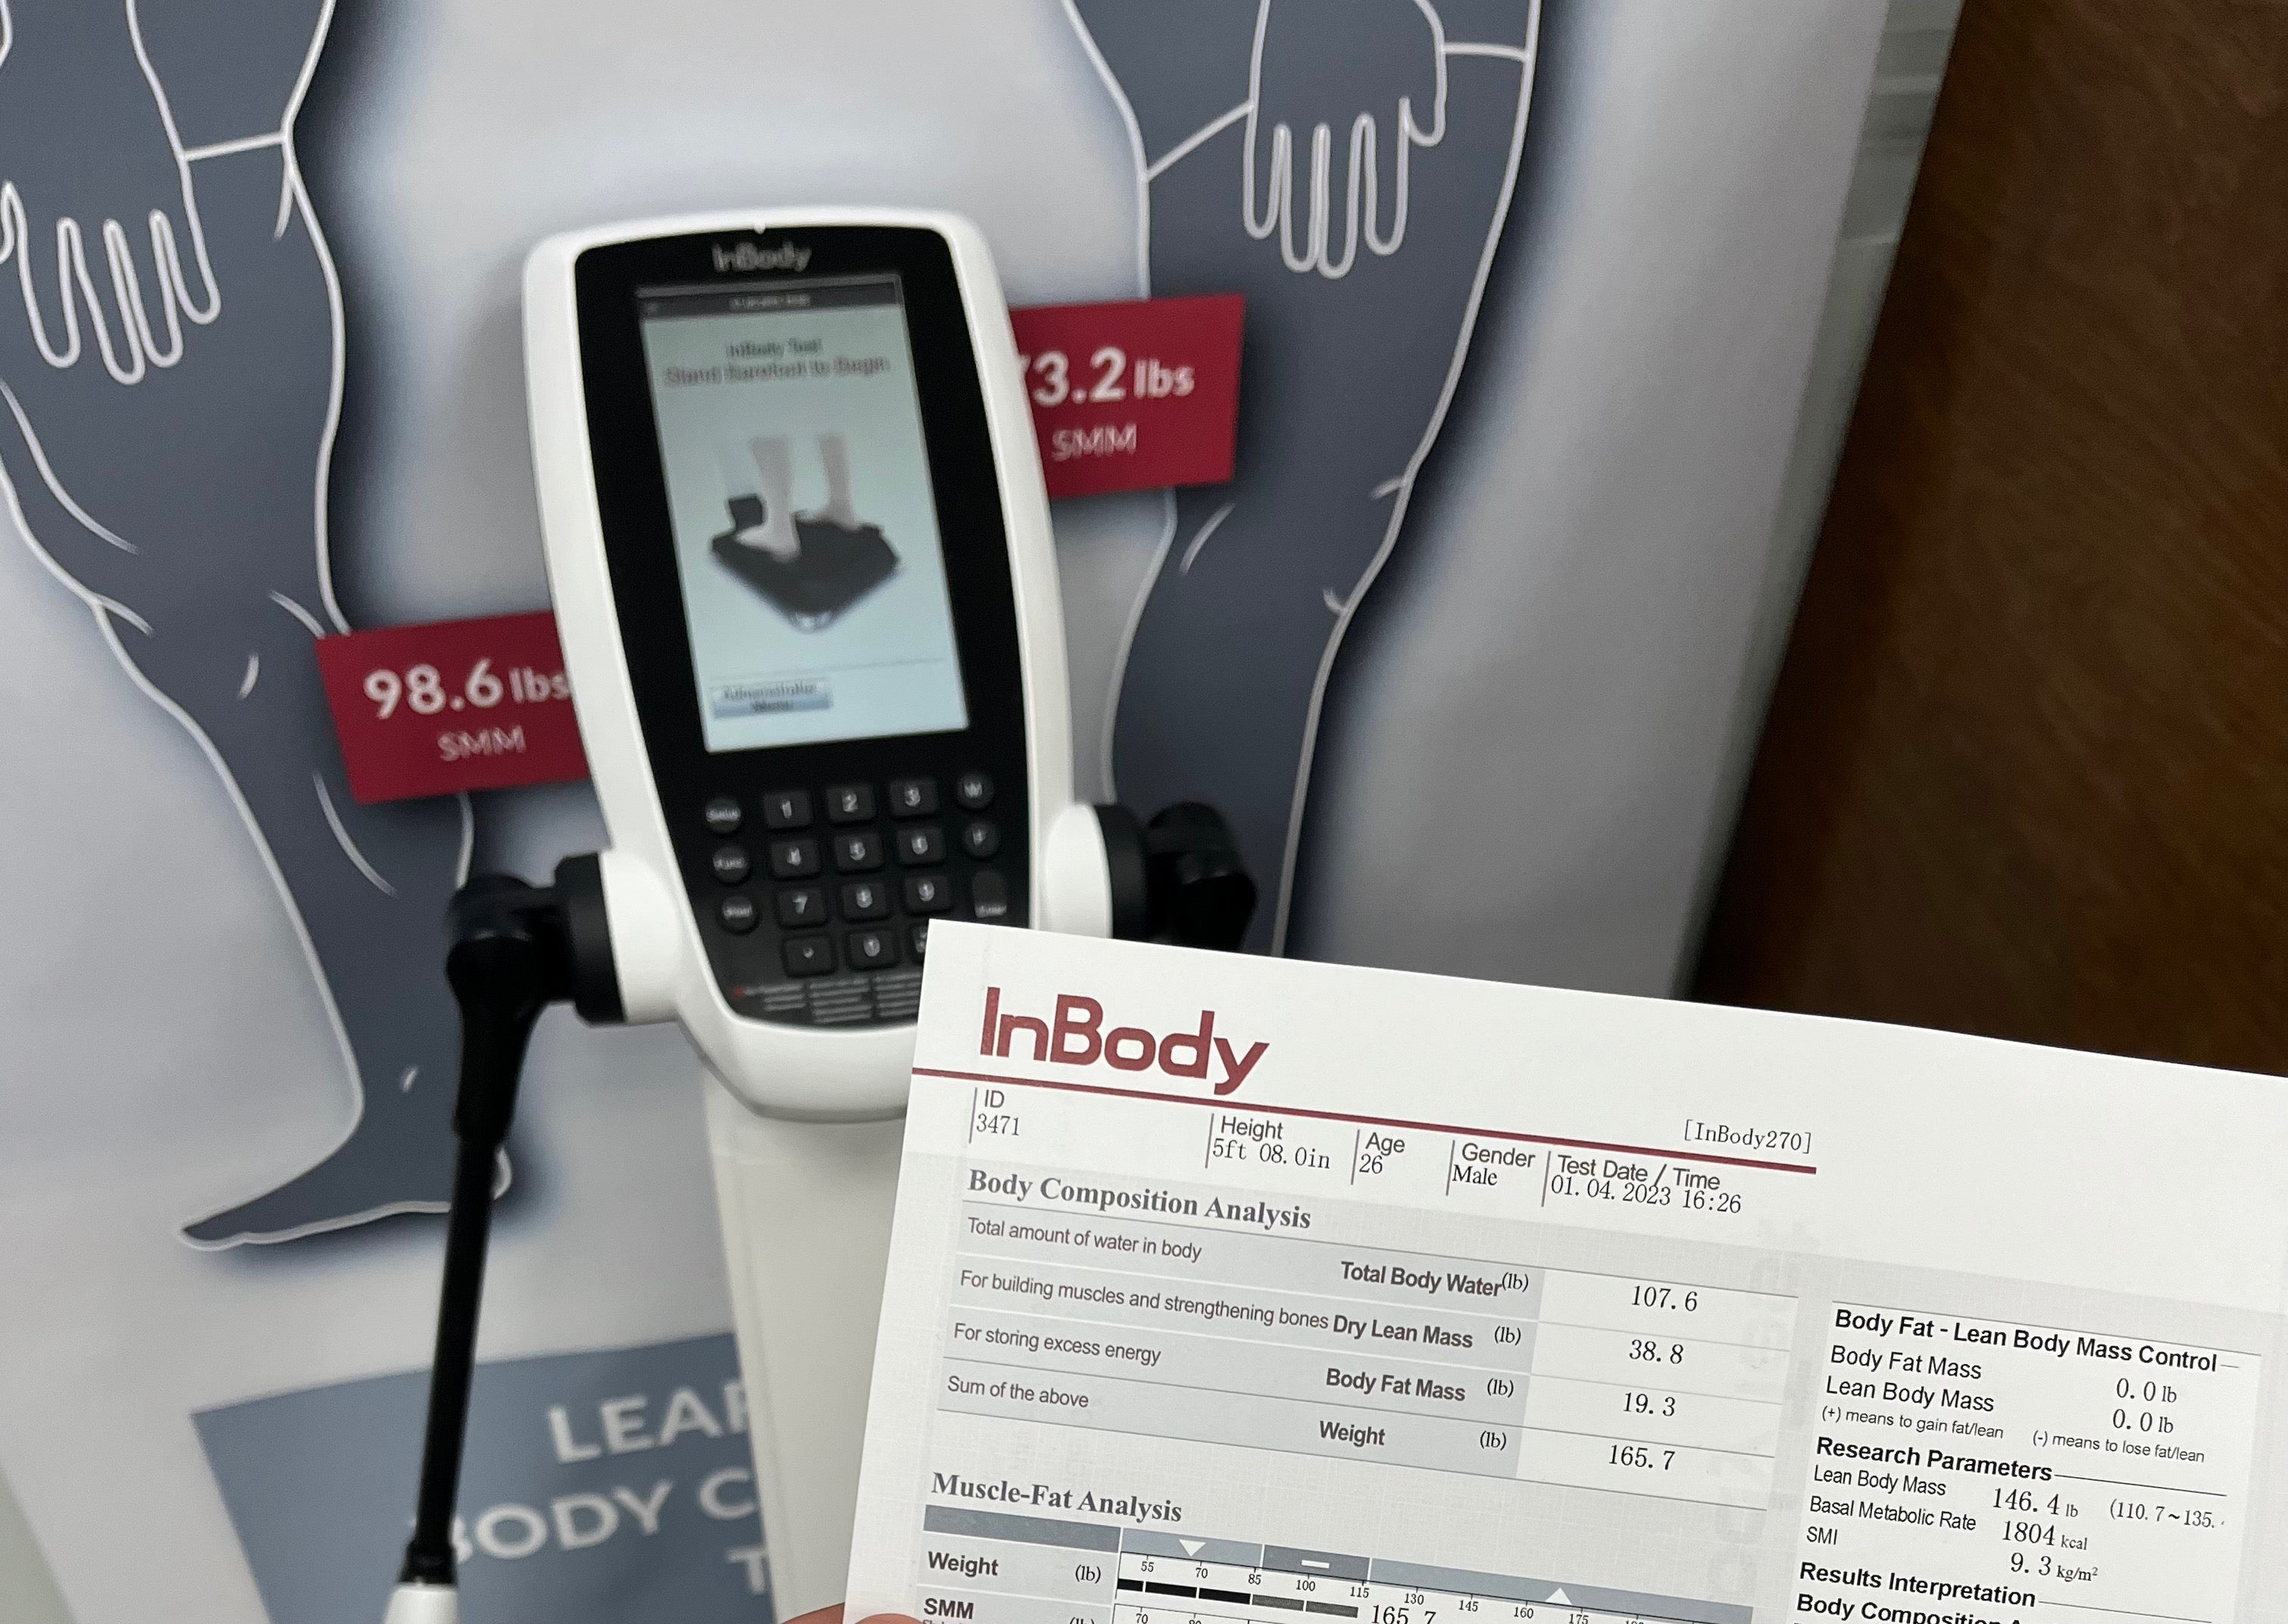 7 reasons to get a Bodyscan - Review of Bodyscan fitness technology